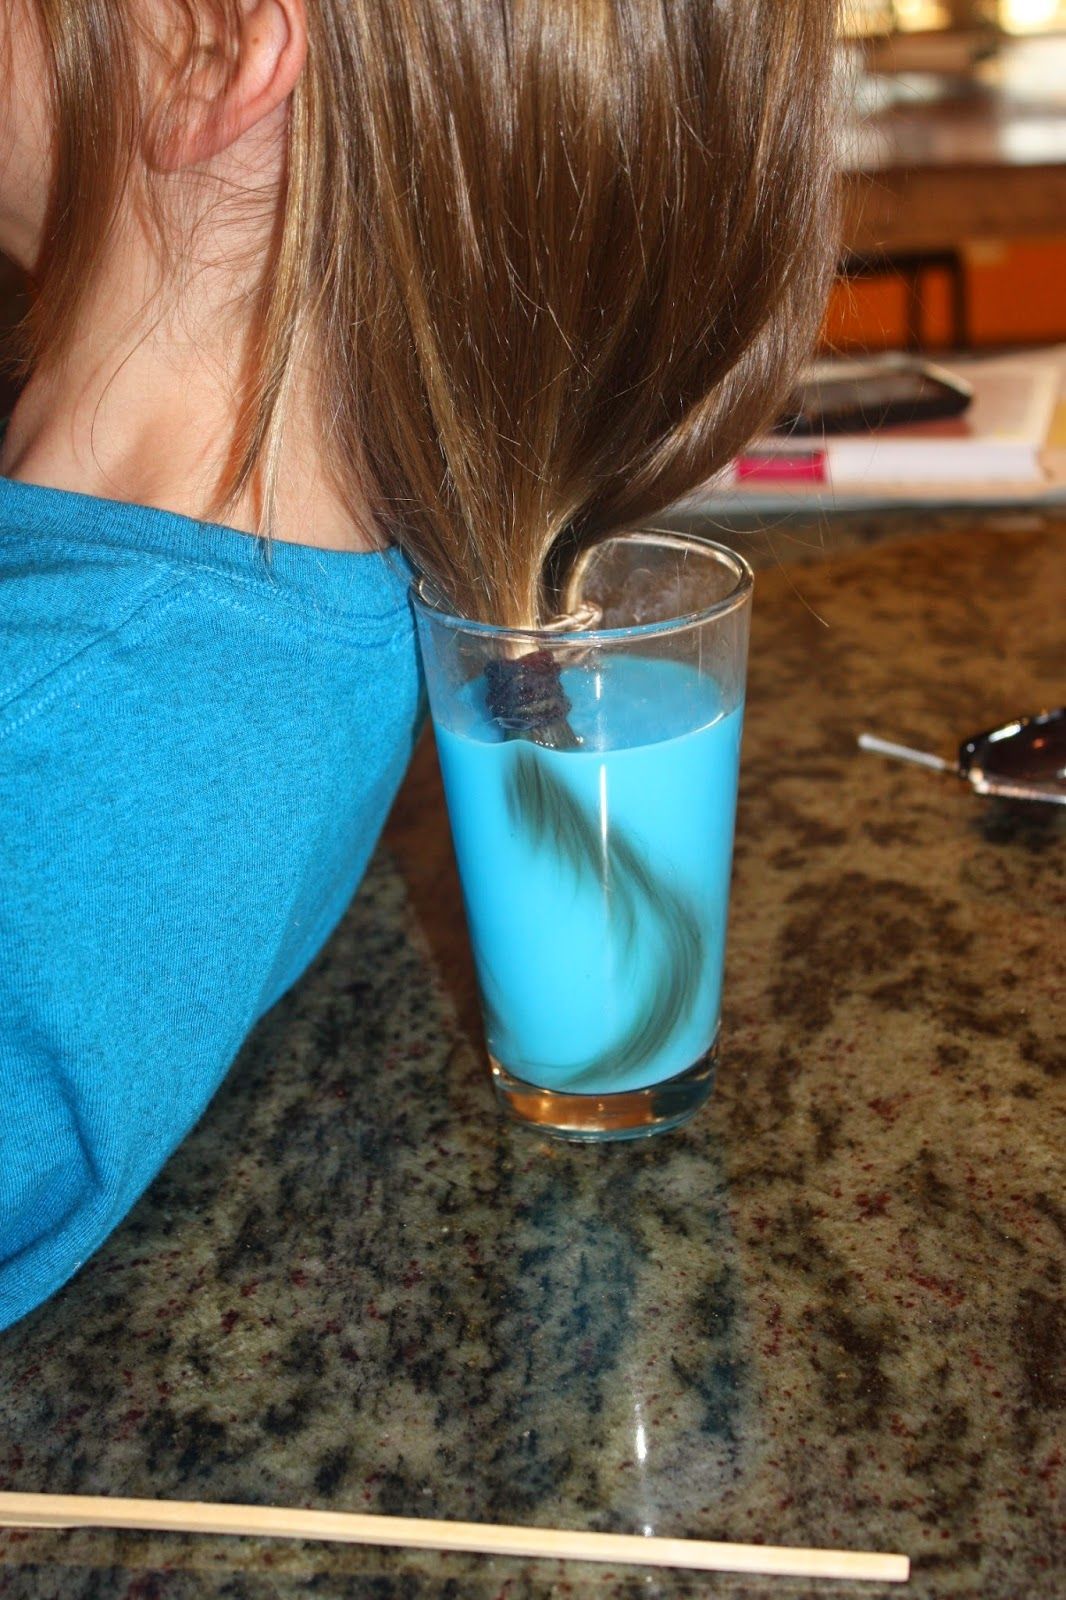 HOW TO DIP DYE YOUR HAIR WITH KOOL-AID. Use warm/cold water instead of boiling to make it temporary!